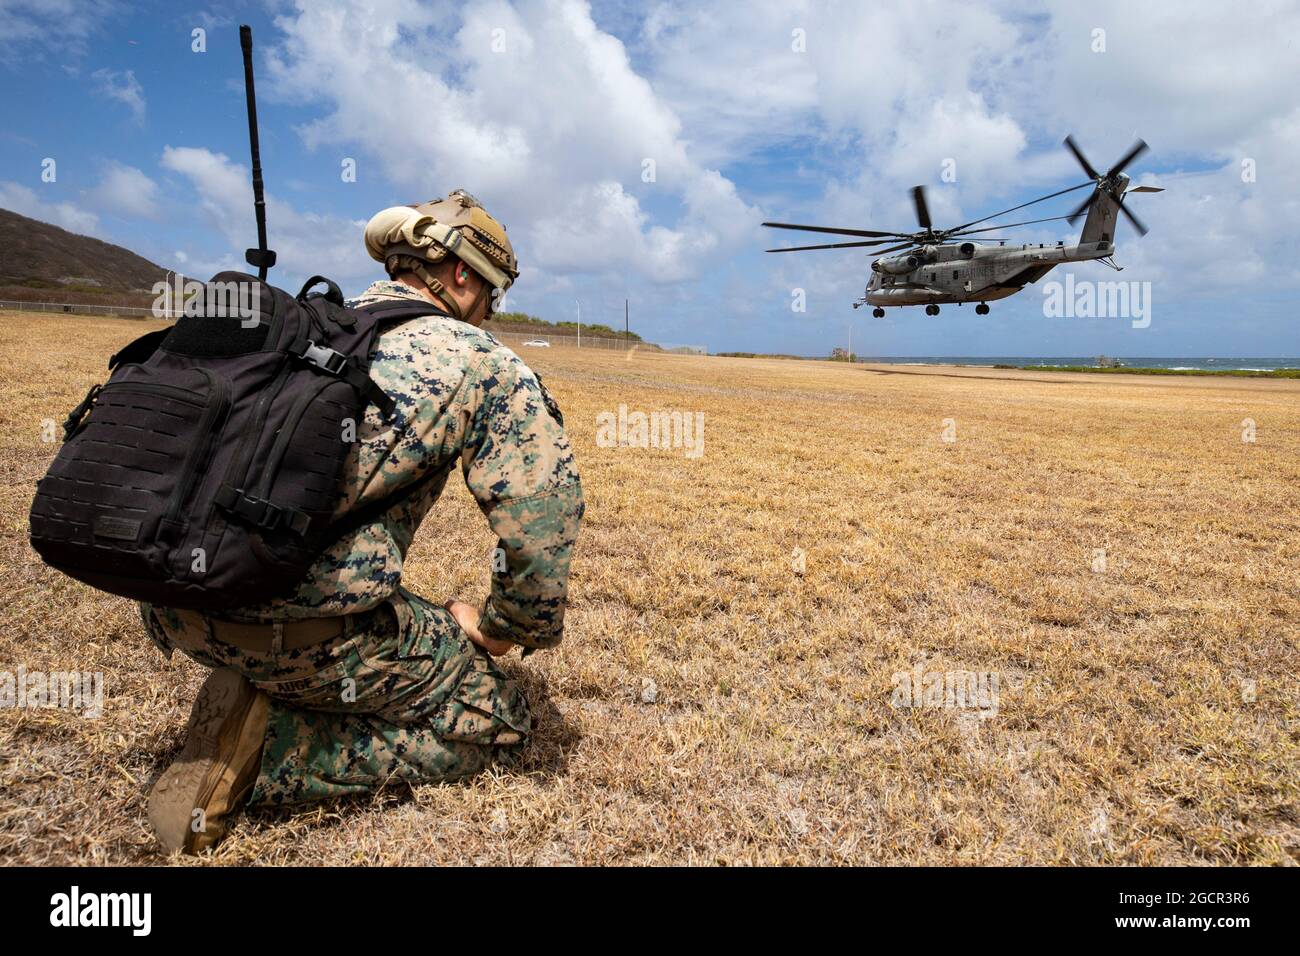 U.S. Marine Corps Sgt. Marcus Auge, air delivery specialist, 3rd Radio Battalion, awaits a CH-53E Super Stallion attached to Marine Heavy Helicopter Squadron 463 during helicopter rope suspension techniques training, Landing Zone Eagle, Marine Corps Base Hawaii, Aug. 6, 2021. As a host platform to all elements of the Marine Air Ground Task Force, MCBH provides the necessary environment to produce readiness in the air, on land and at sea. (U.S. Marine Corps photo by Lance Cpl. Samantha Sanchez) Stock Photo